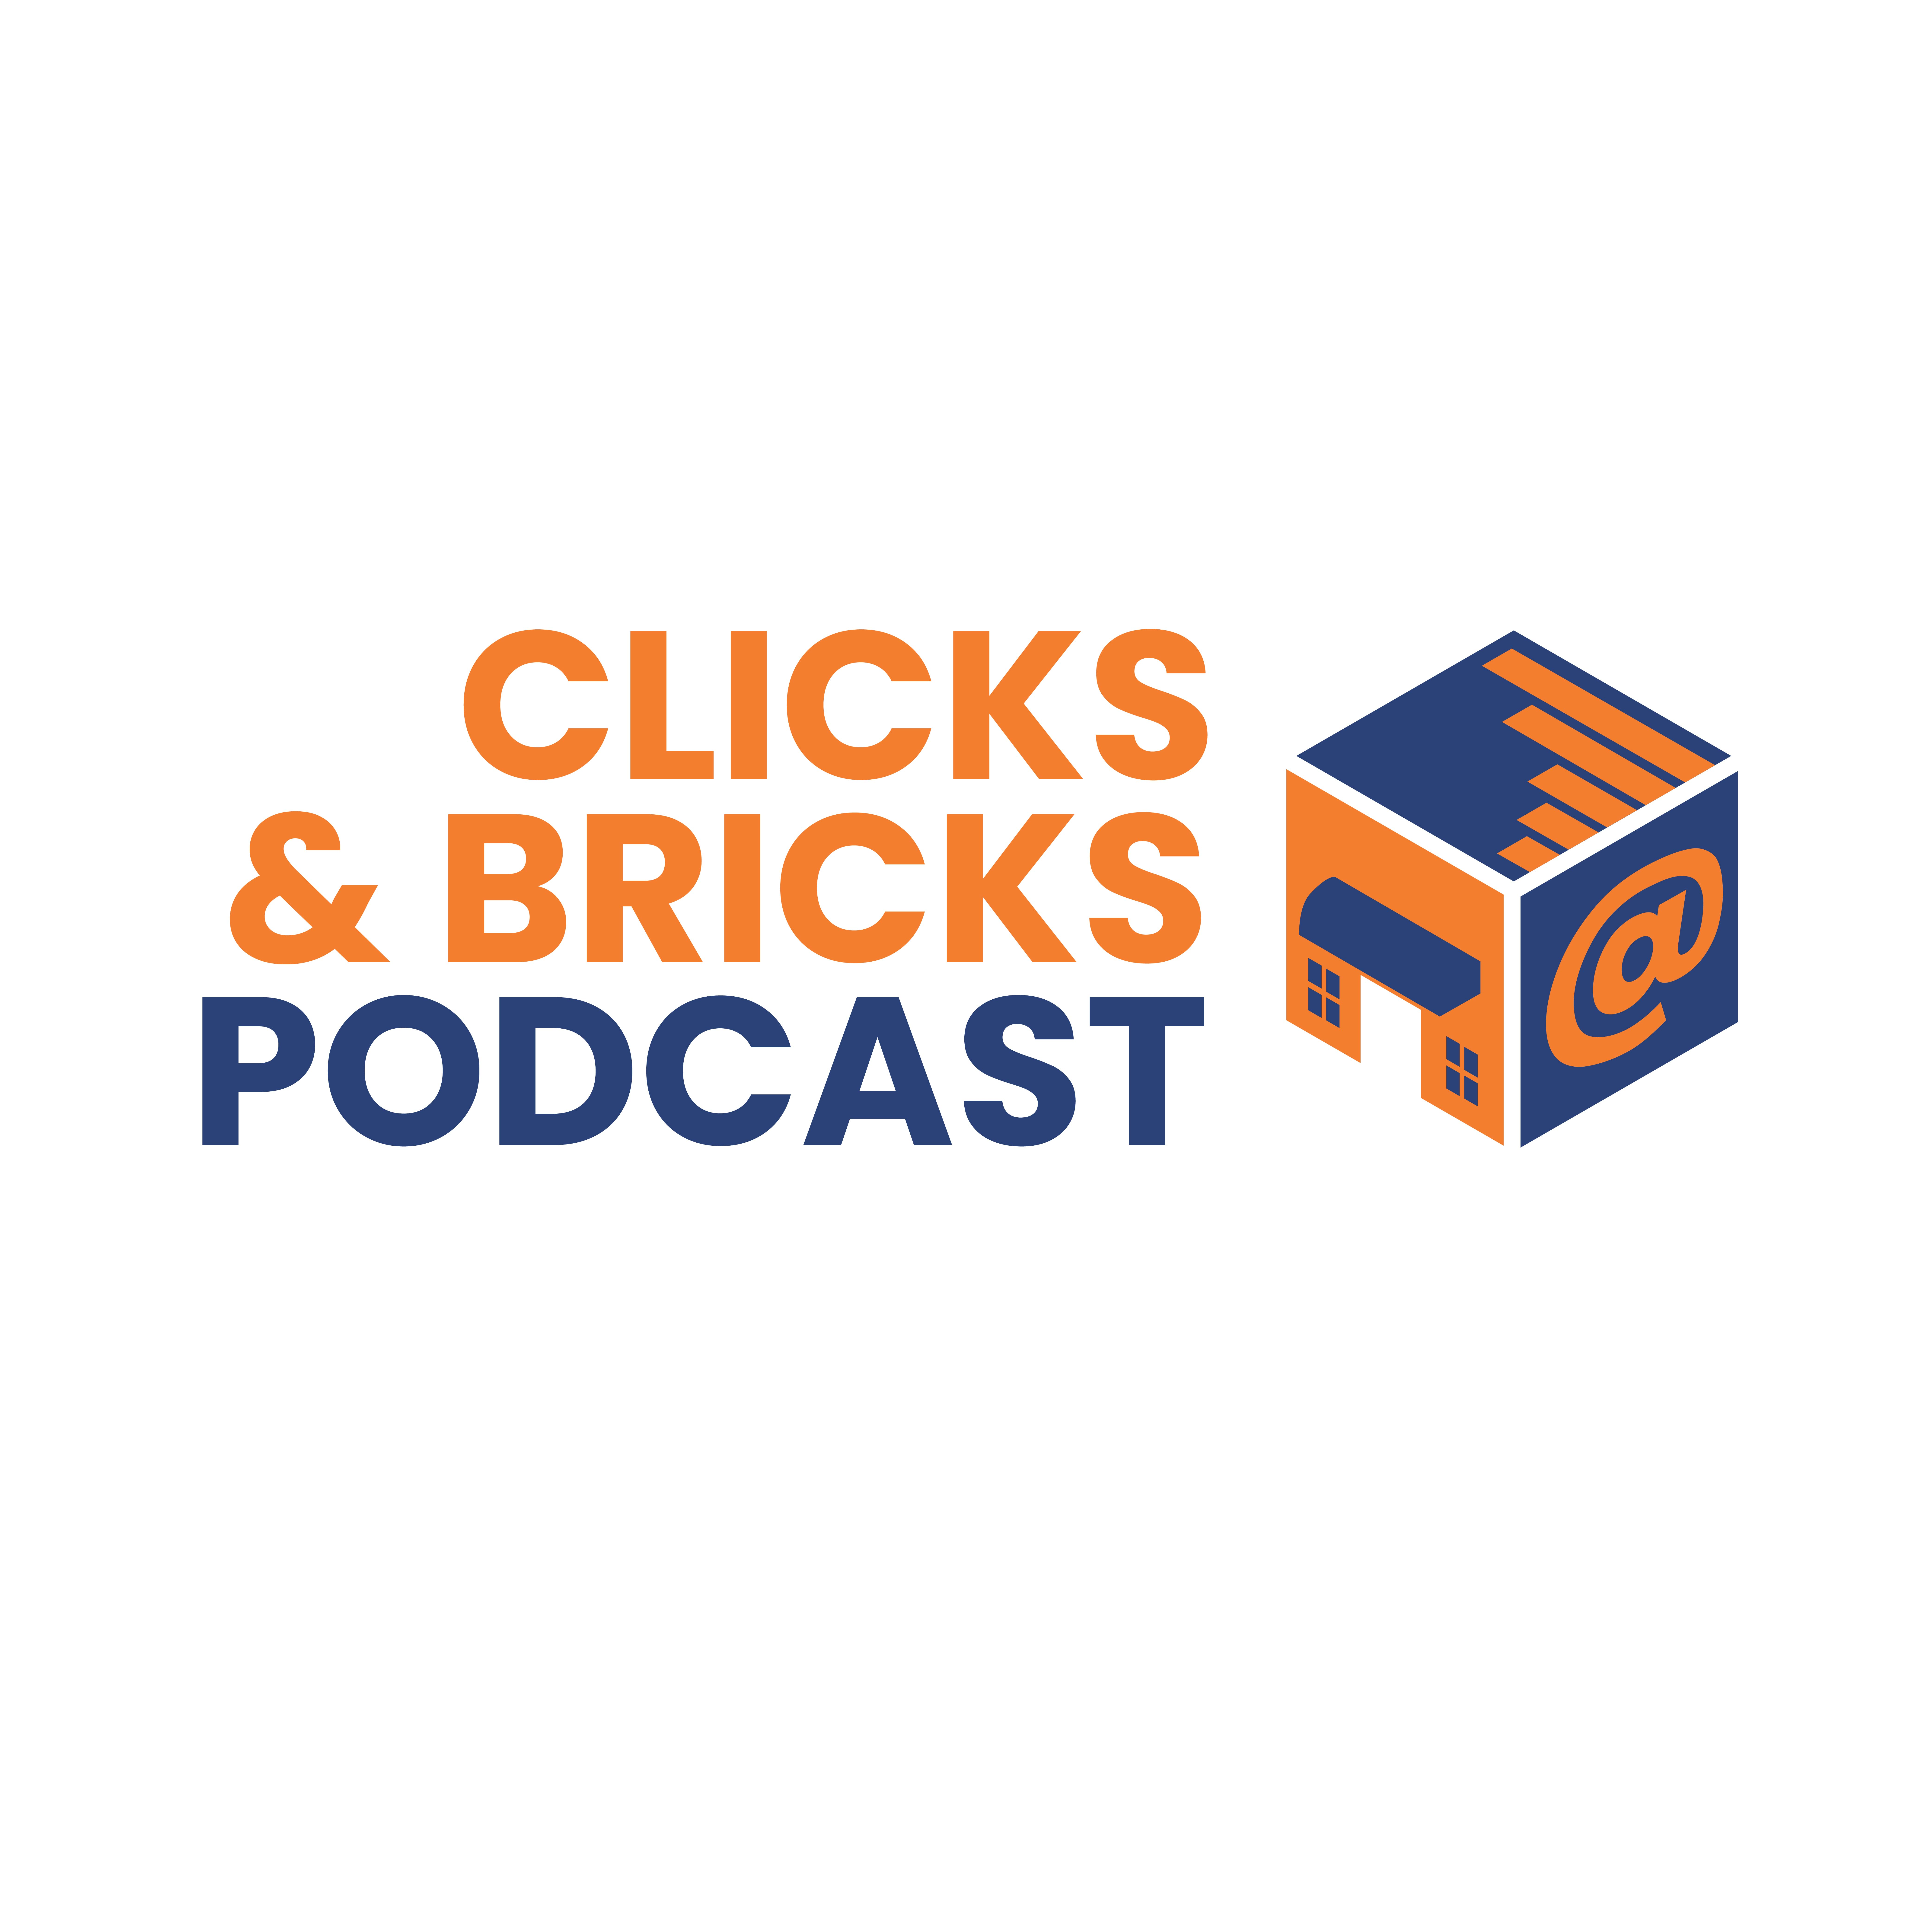 Yuri Galeev of CONSTRUCTO to be Featured on the Clicks & Bricks Podcast